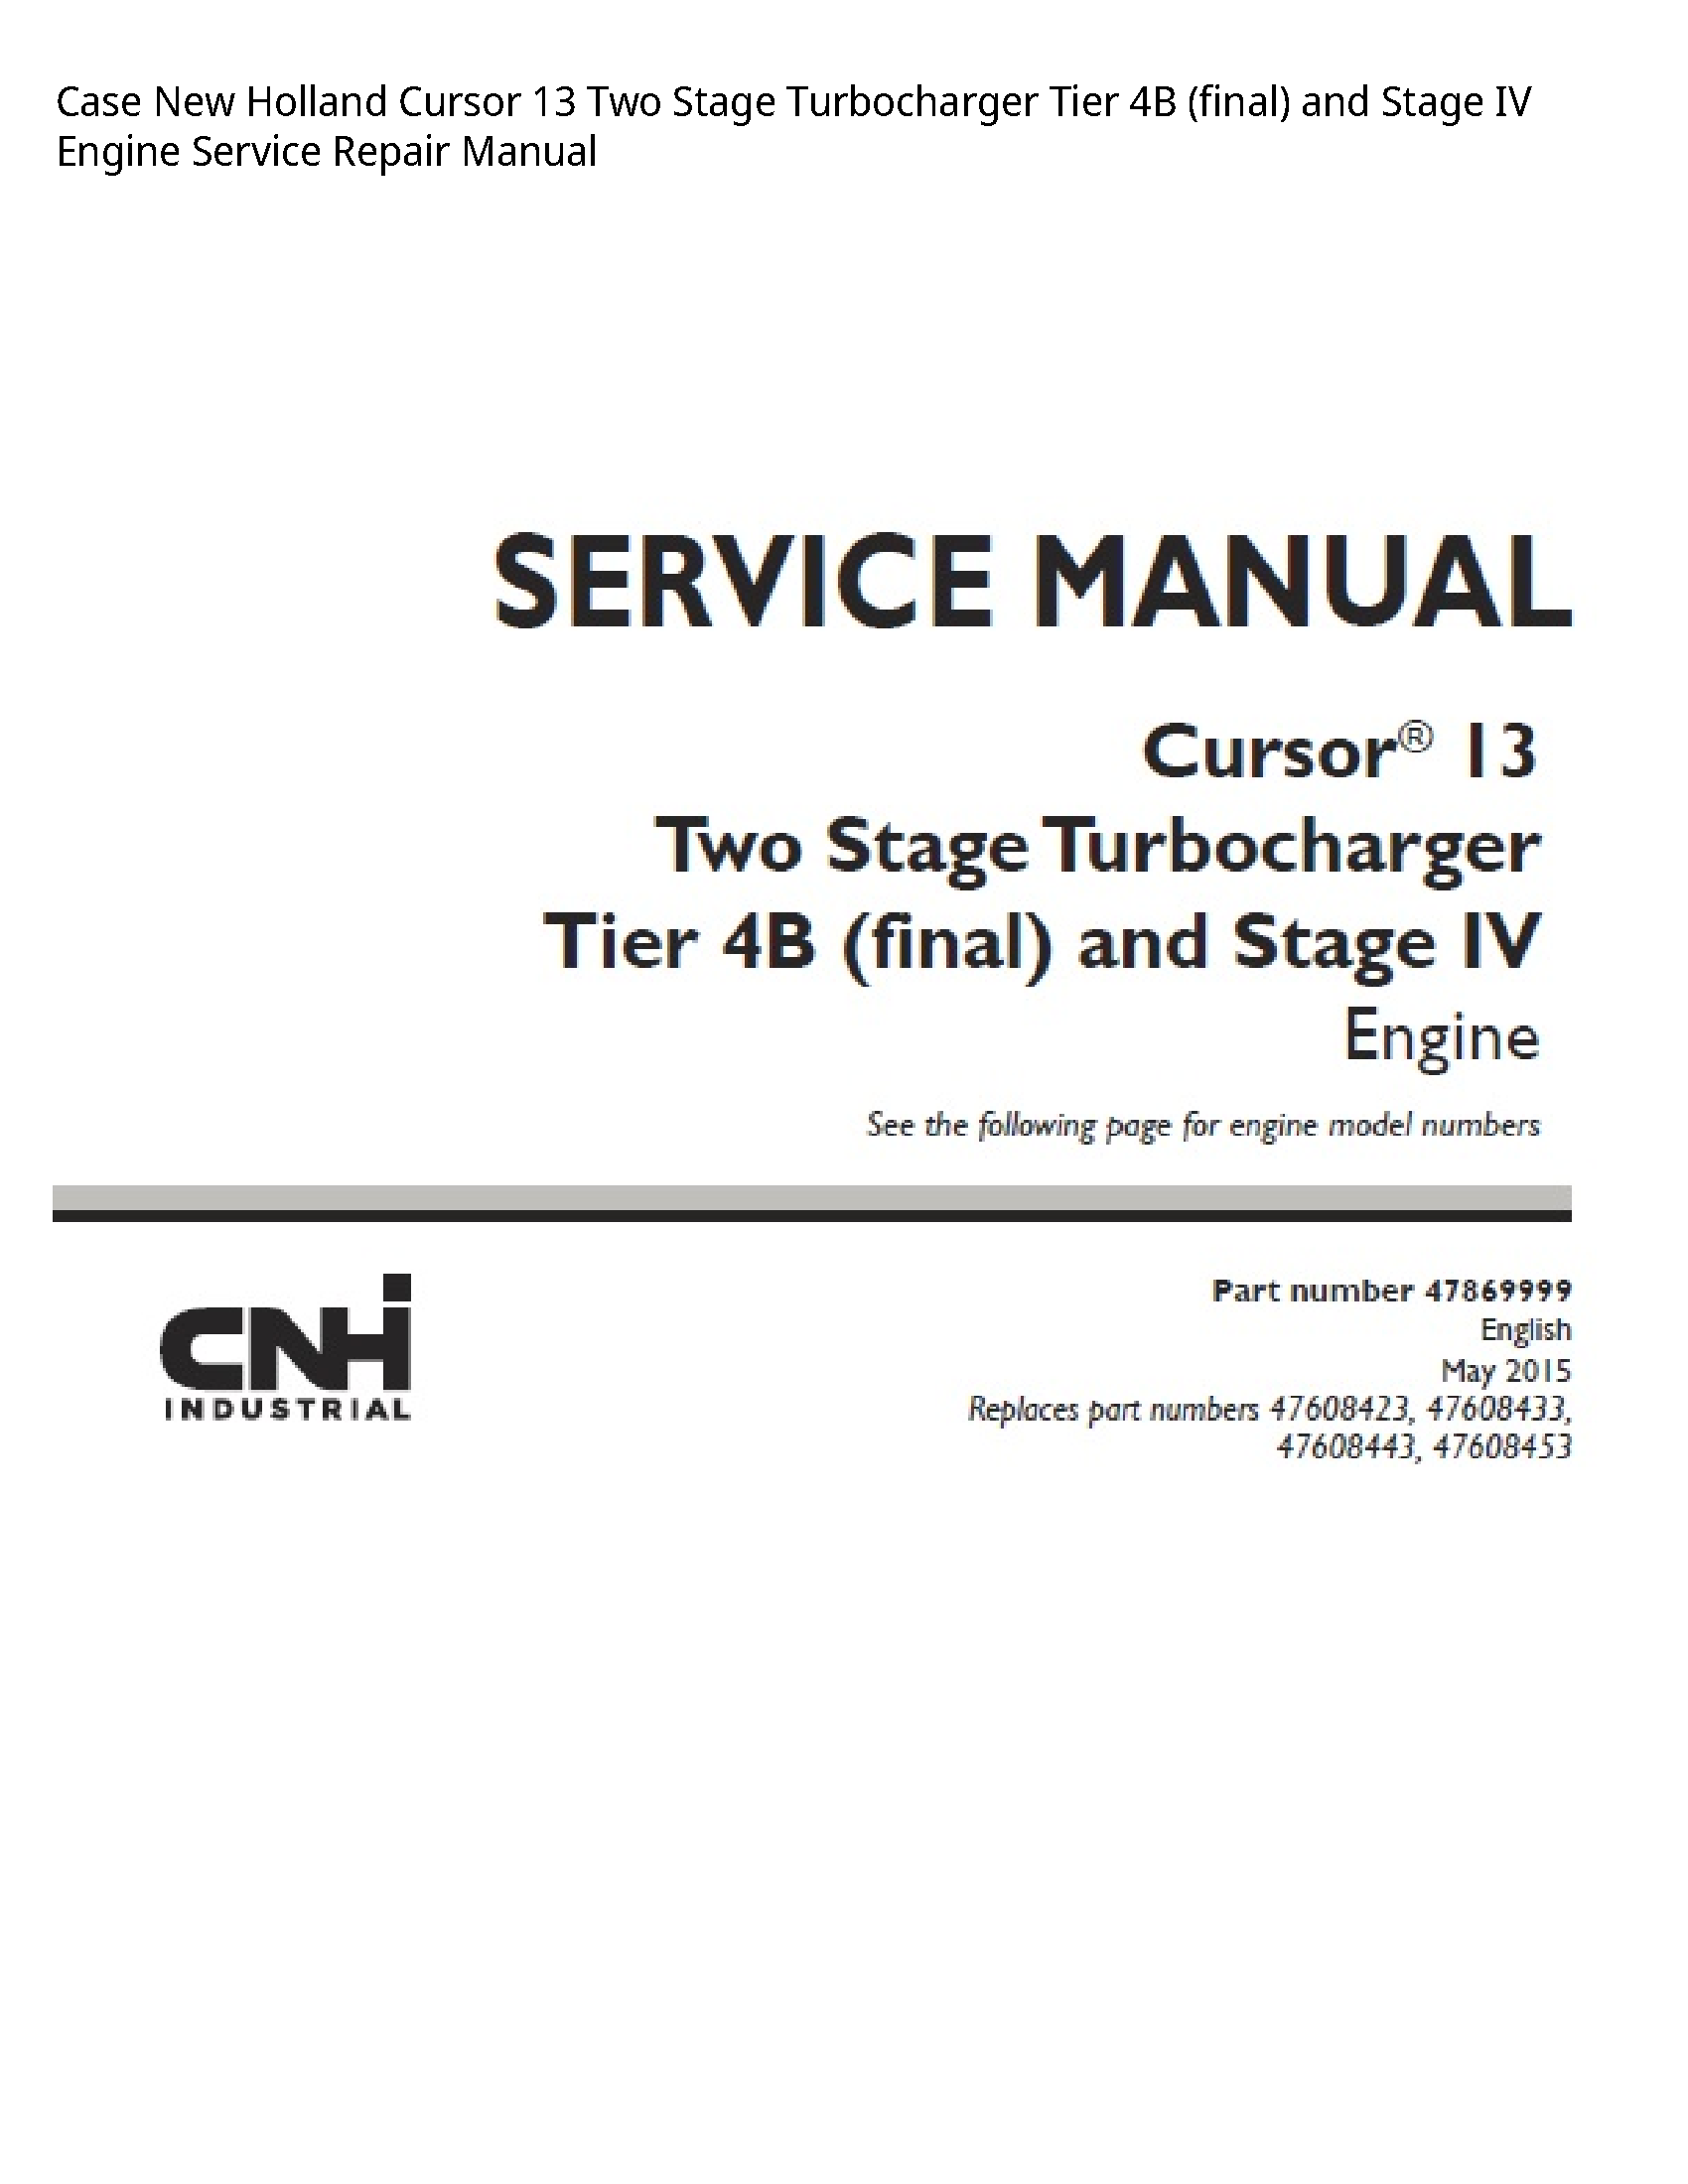 Case/Case IH 13 New Holland Cursor Two Stage Turbocharger Tier (final)  Stage IV Engine manual